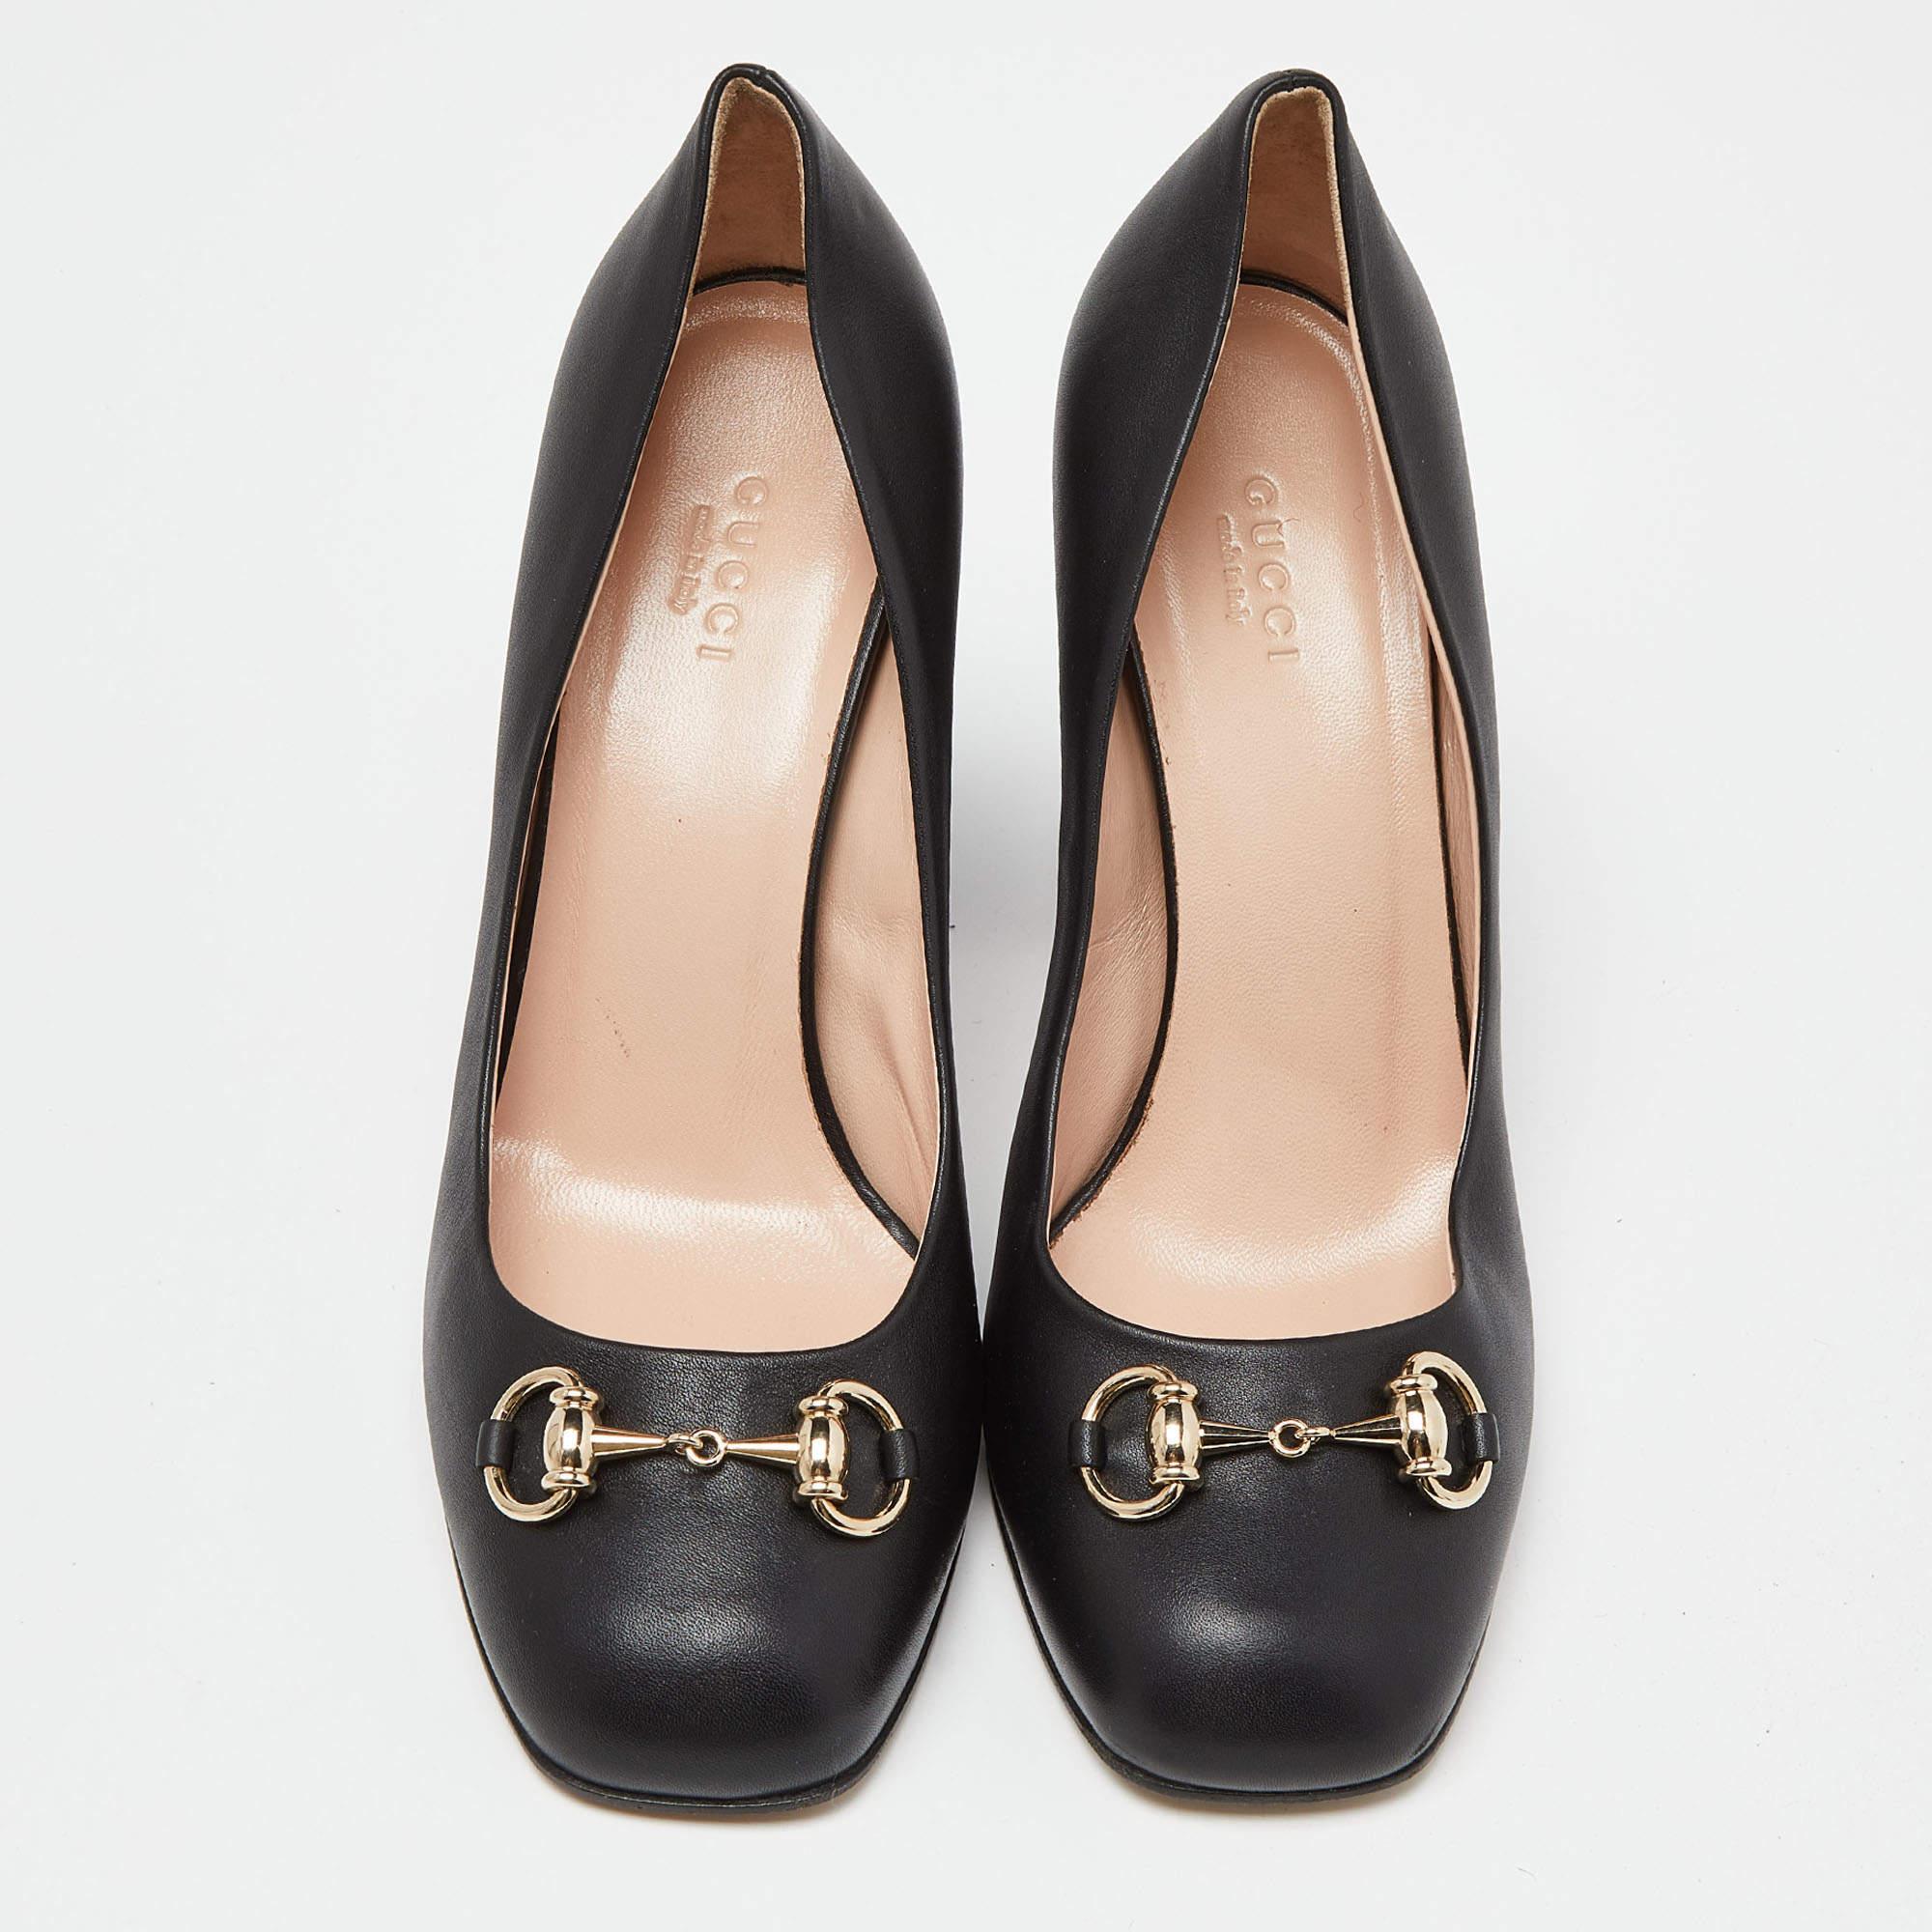 Grace and poise will all come naturally to you when you step out in this pair of pumps from Gucci. Crafted from black leather, the square-toe pumps have been styled with 10cm block heels and the iconic Horsebit detail on the uppers. They are